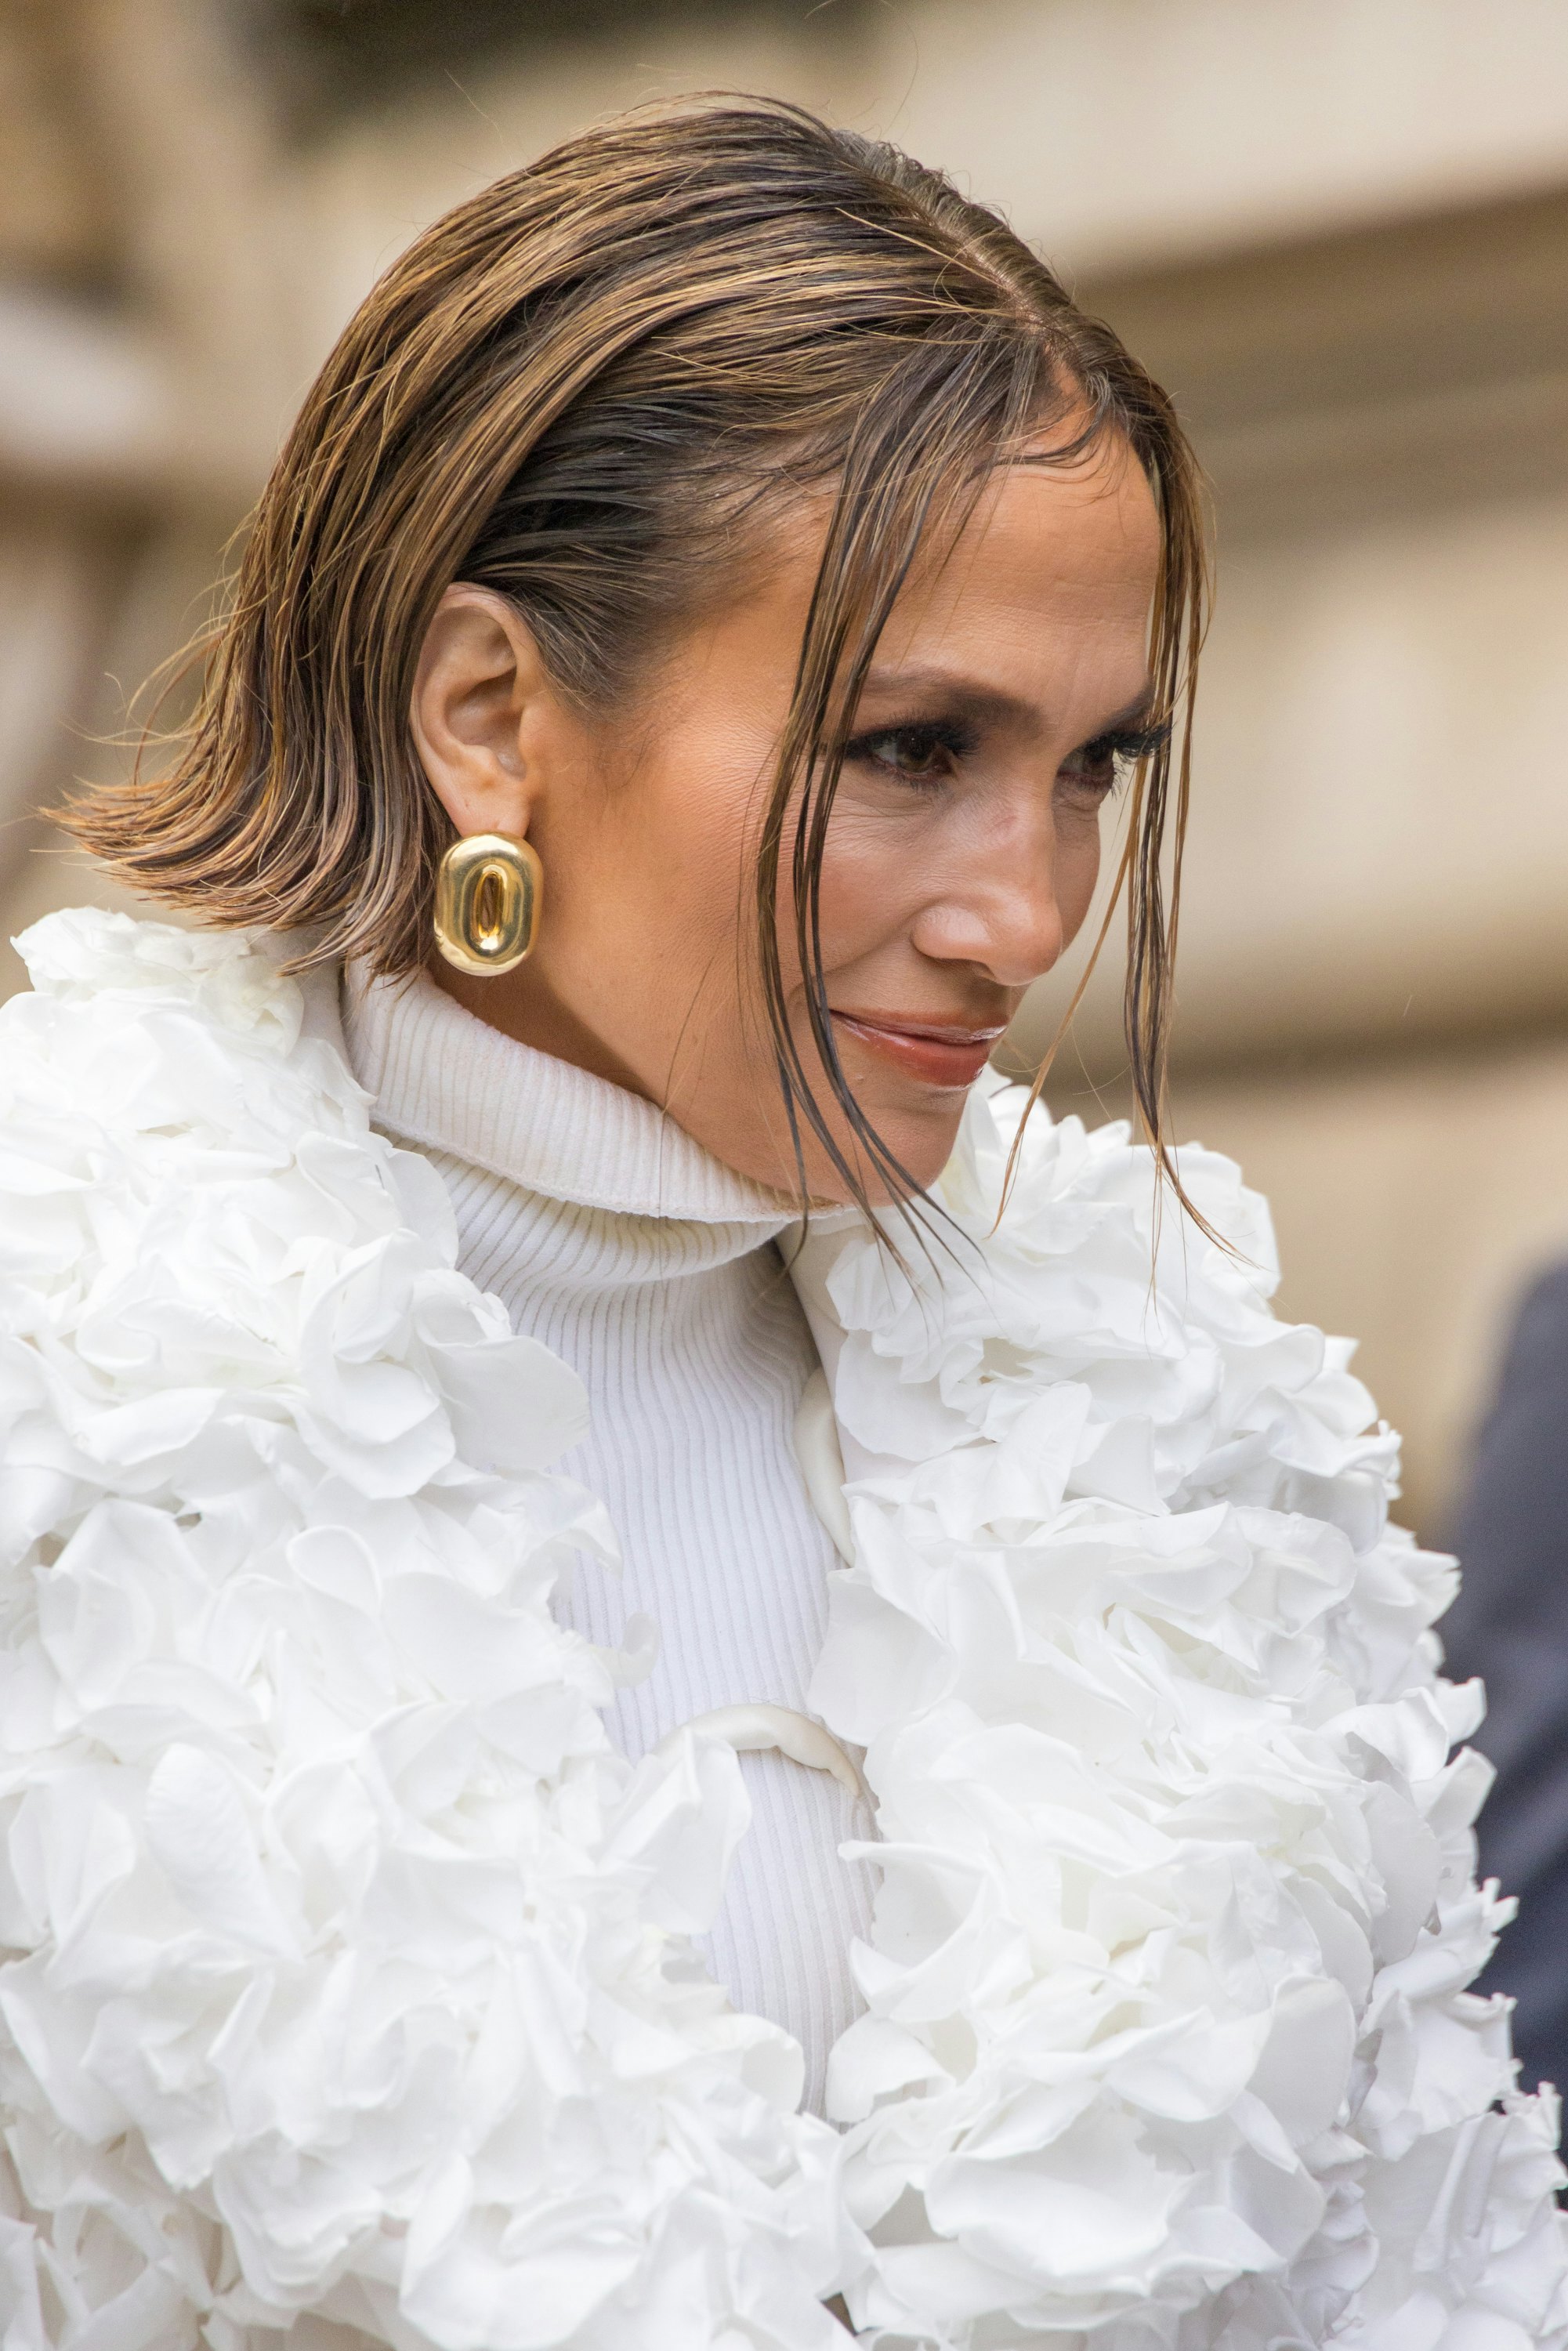 Jennifer Lopez Debuts a Whole New Look at the Schiaparelli Couture Show